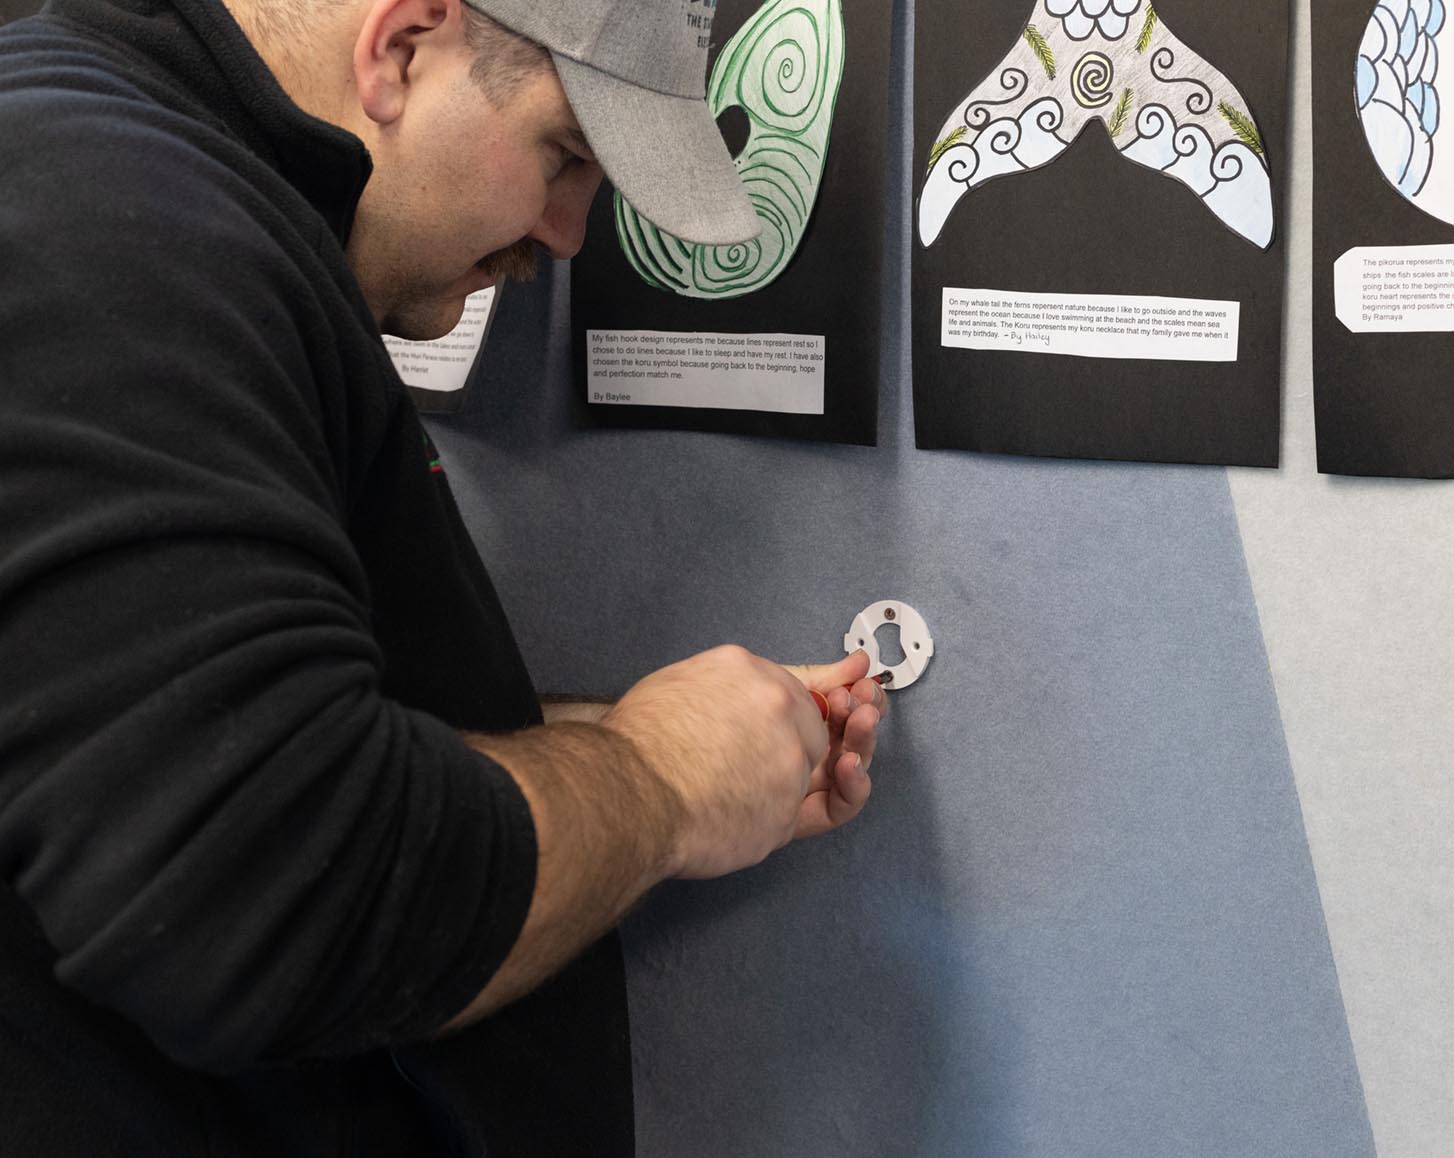 An installer screws an AirSuite mounting bracket into the wall in a classroom